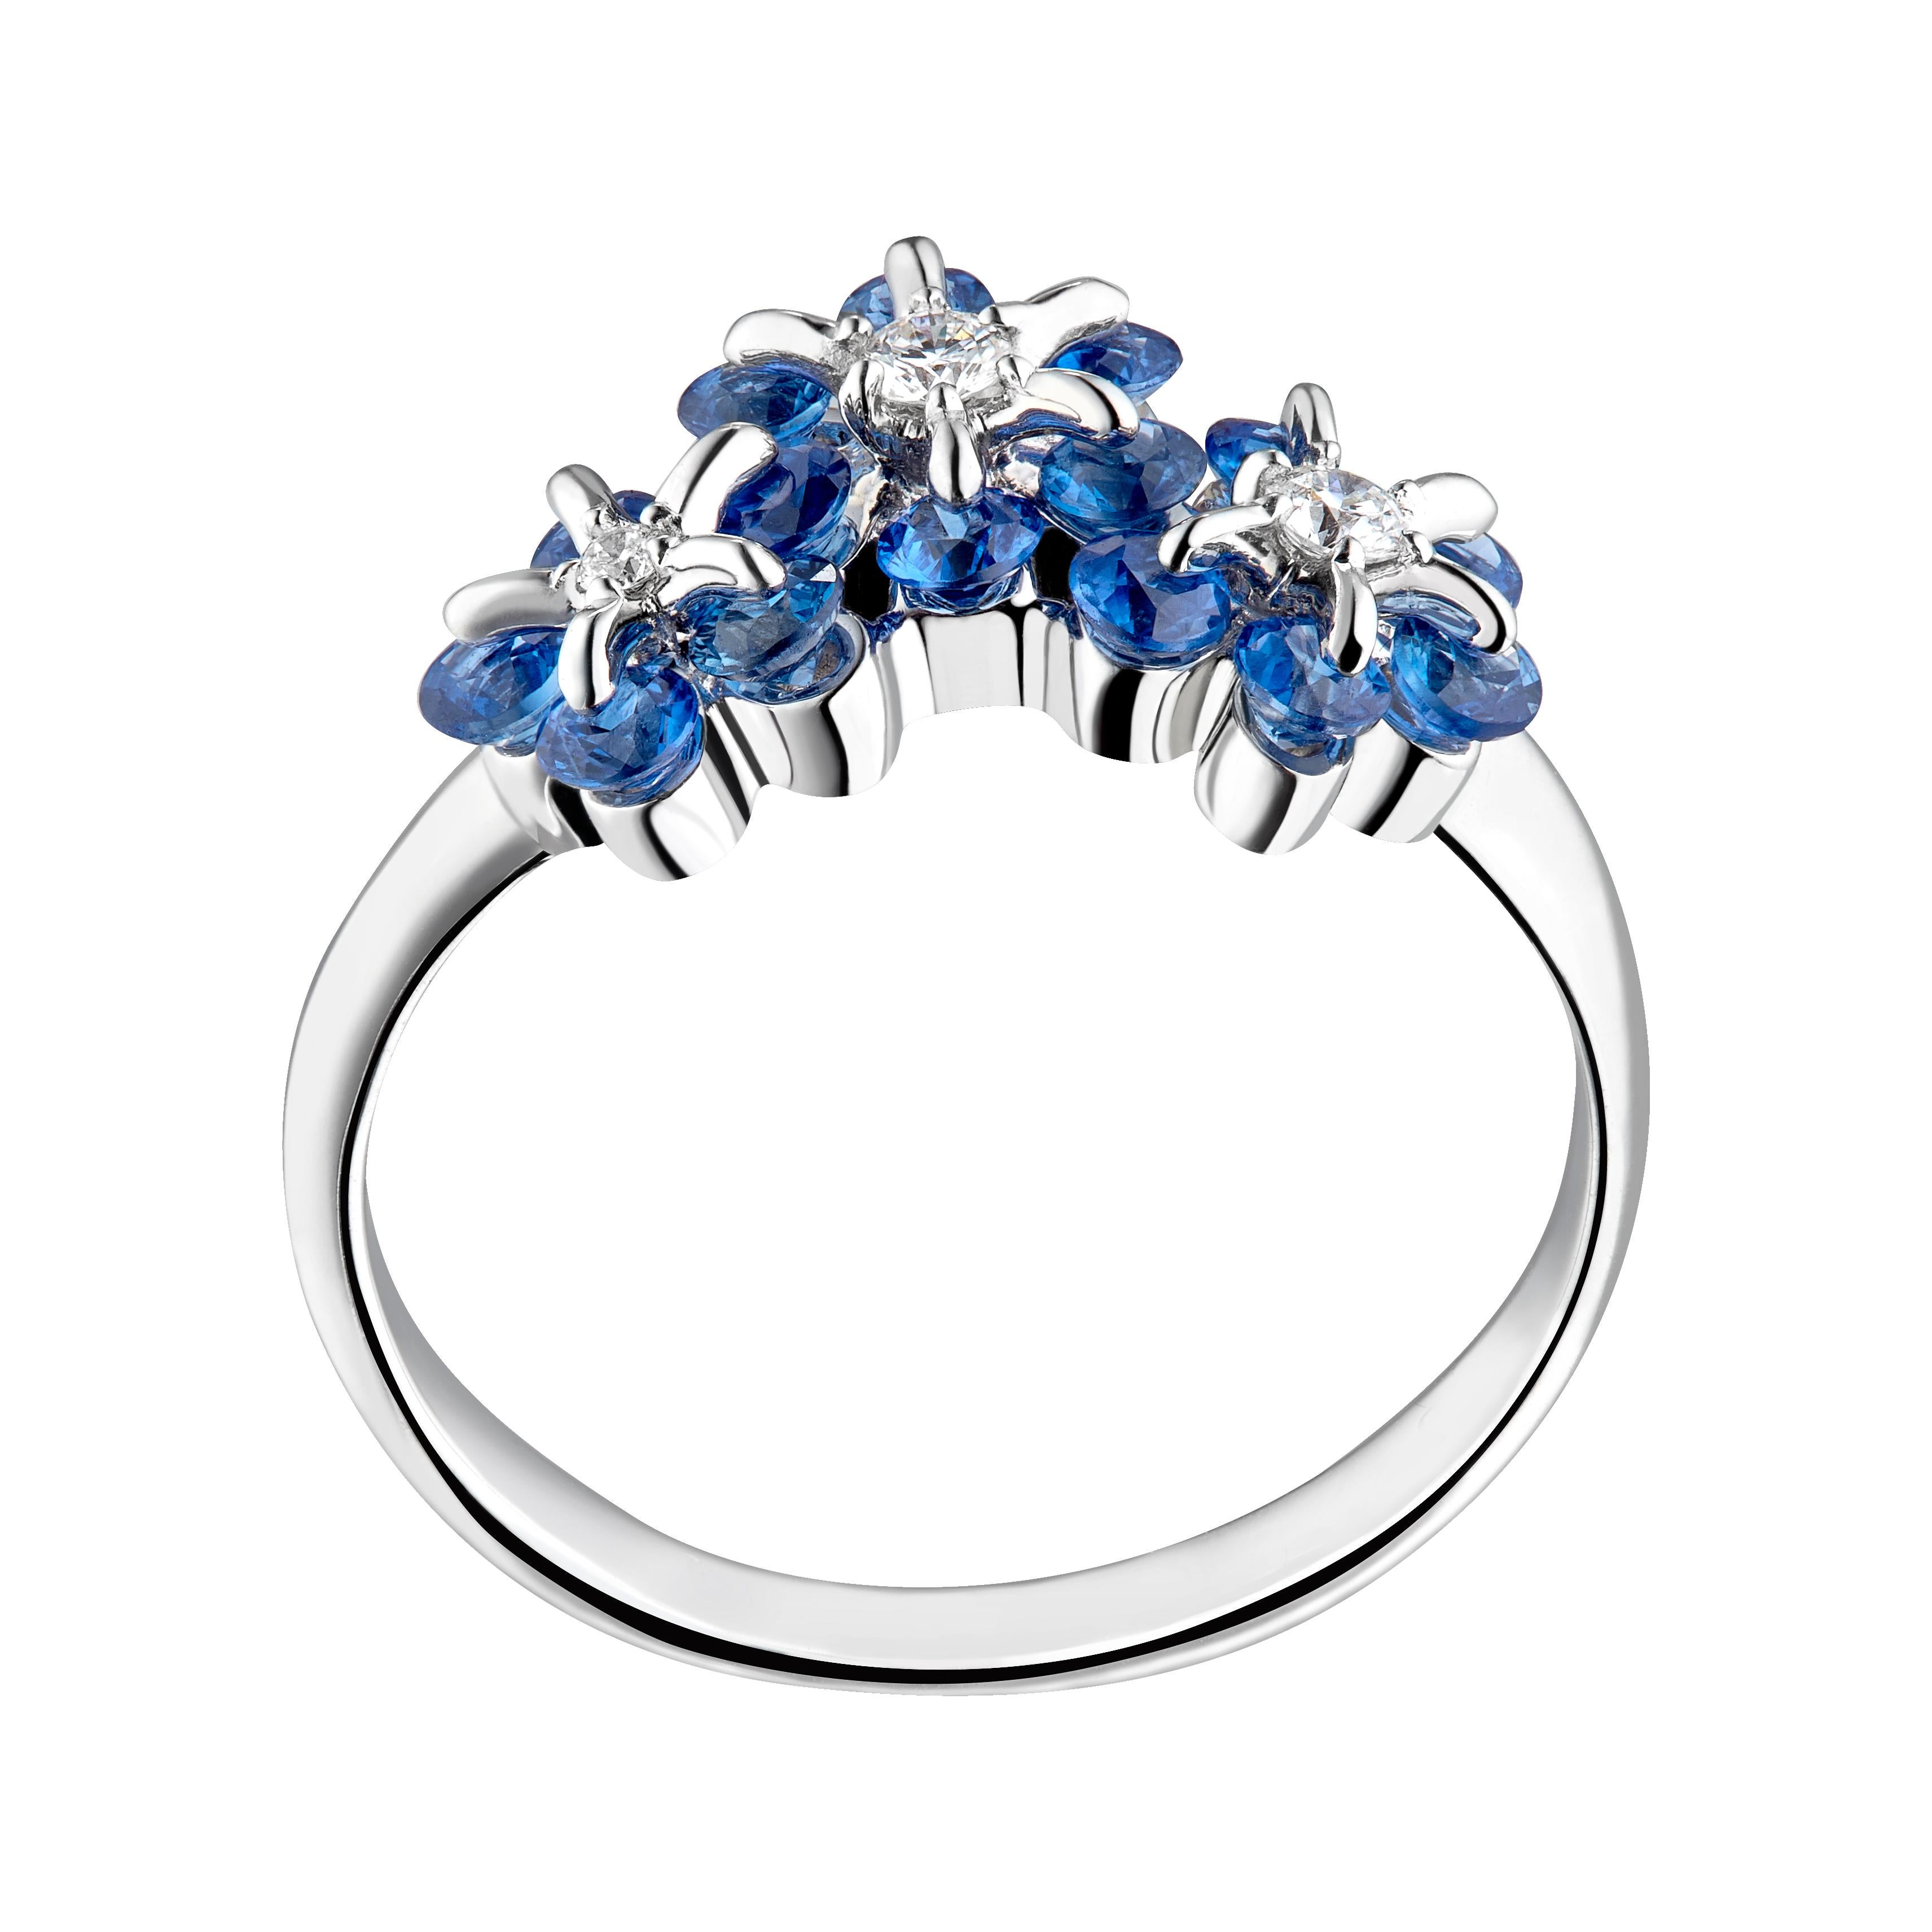 Diamond-cut blue sapphires are mounted carefully in delicate flower design, employing innovative technology.  

Internationally patented, Waltzing Brilliance technology is an innovative jewellery invention patented by a leading Russian designer,